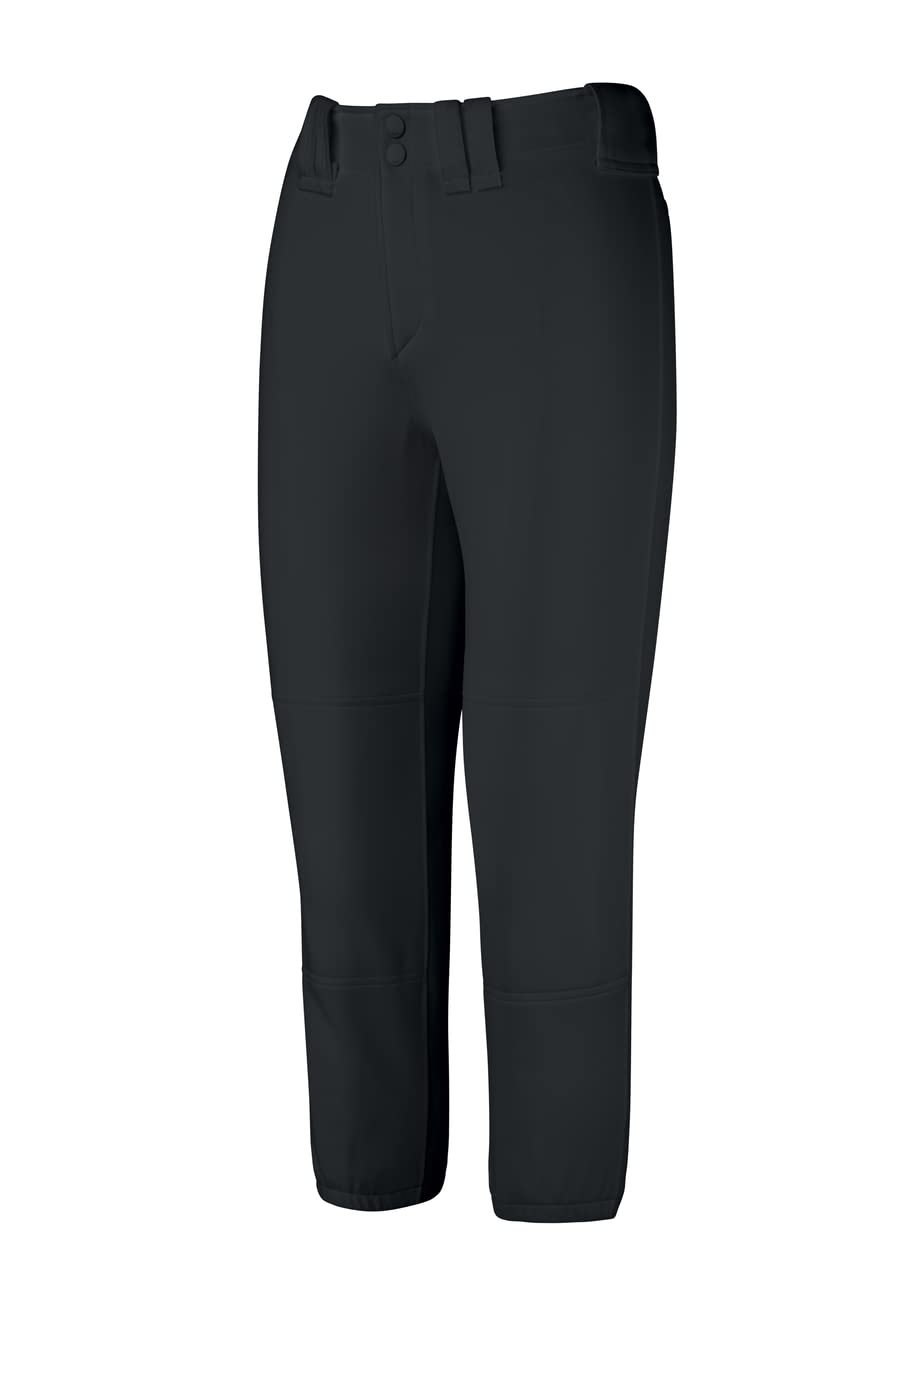 Mizuno Adult Women's Belted Low Rise Fastpitch Softball Pant